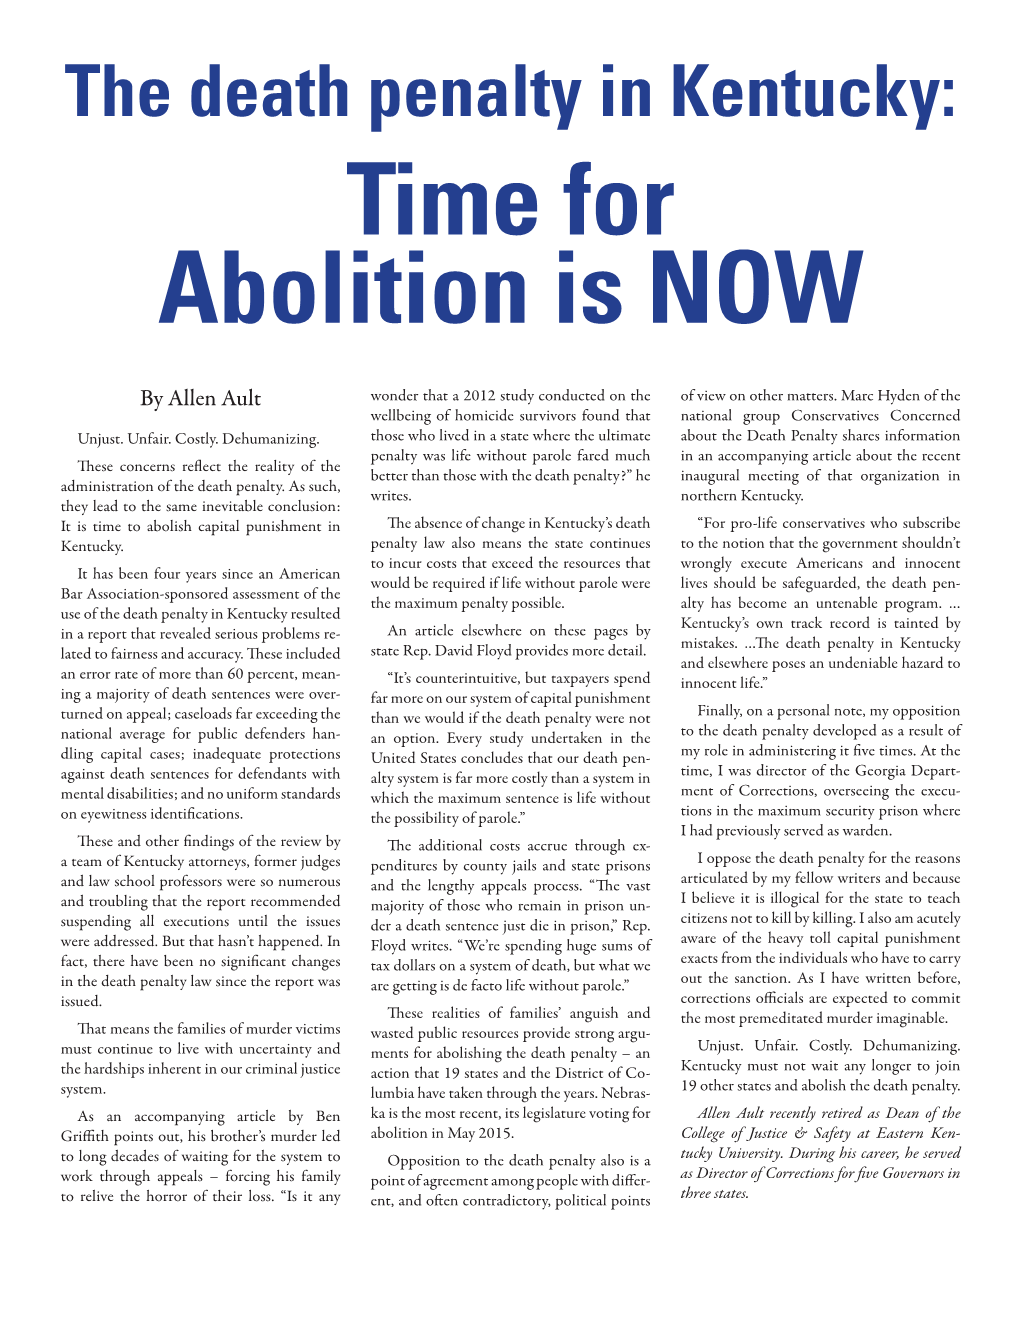 Time for Abolition Is NOW